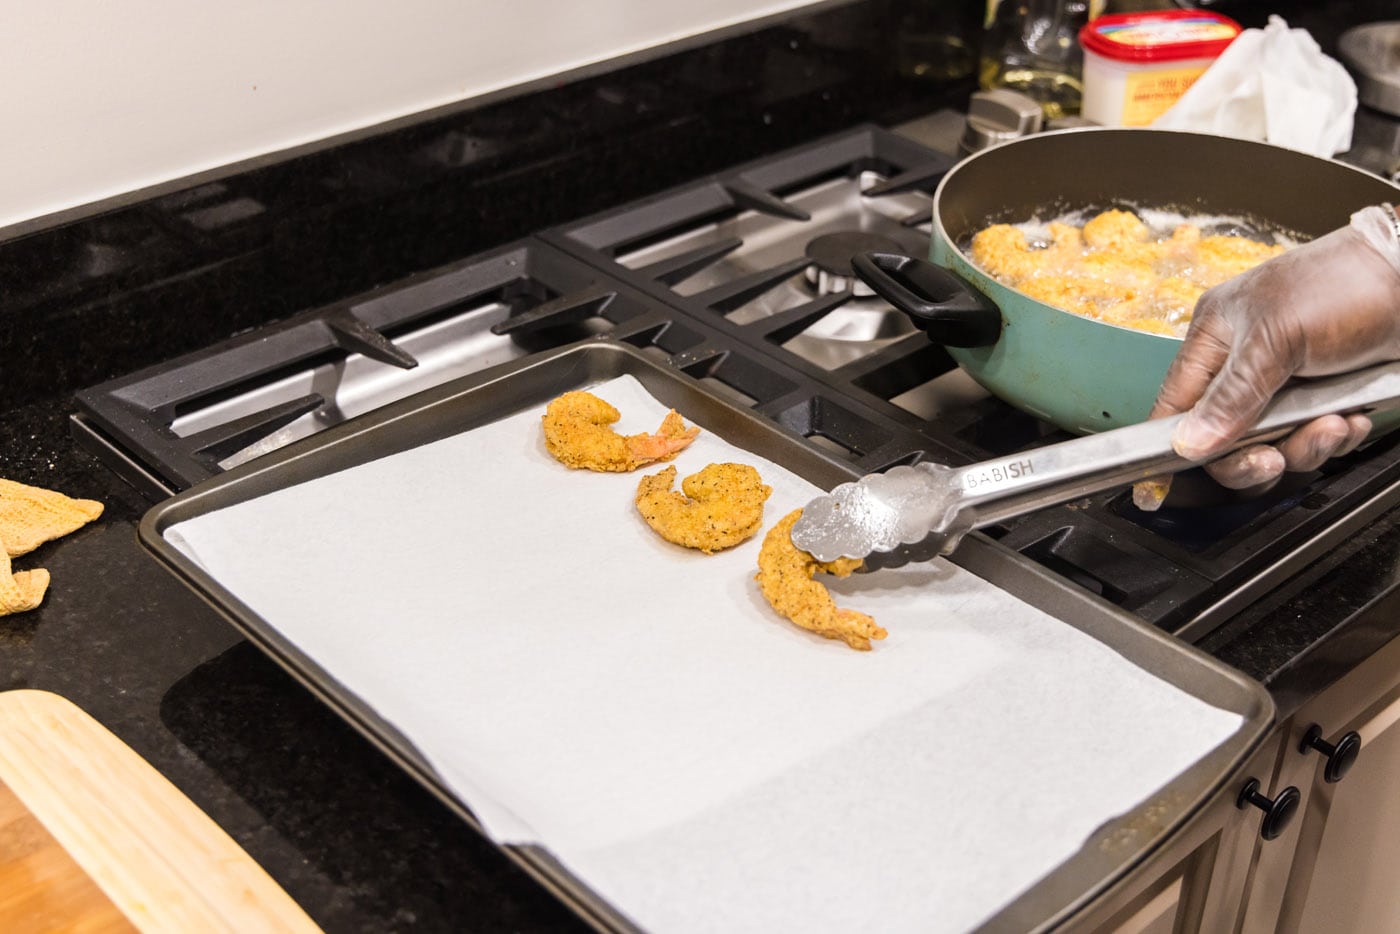 removing fried shrimp from oil and placing on paper towels